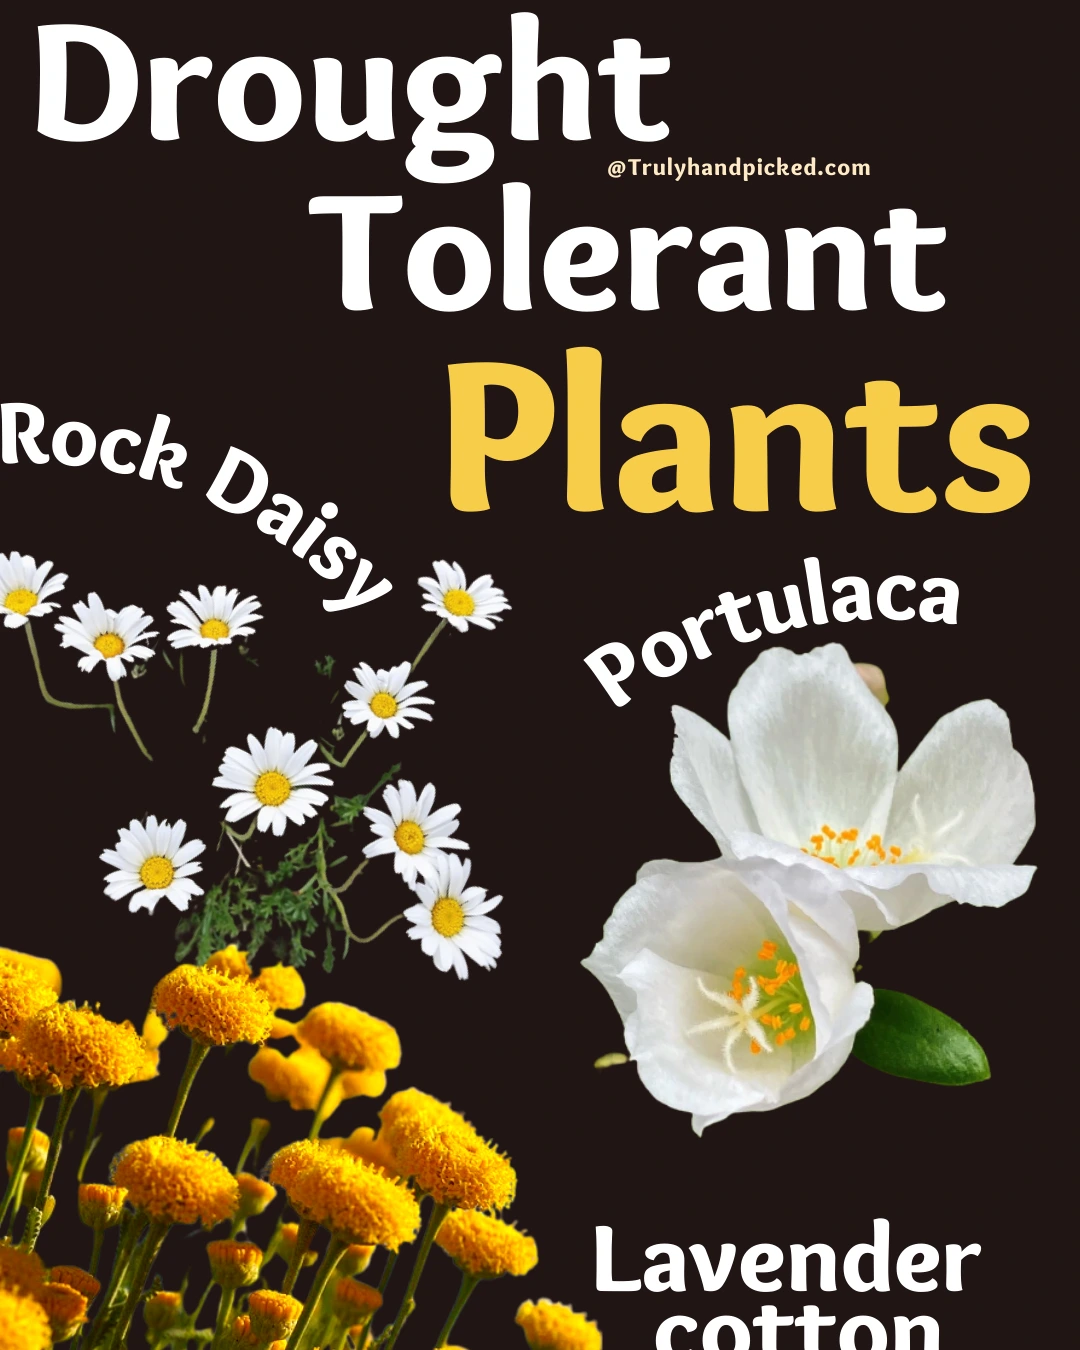 Rock daisy and Few more drought tolerant heat tolerant plants for your garden